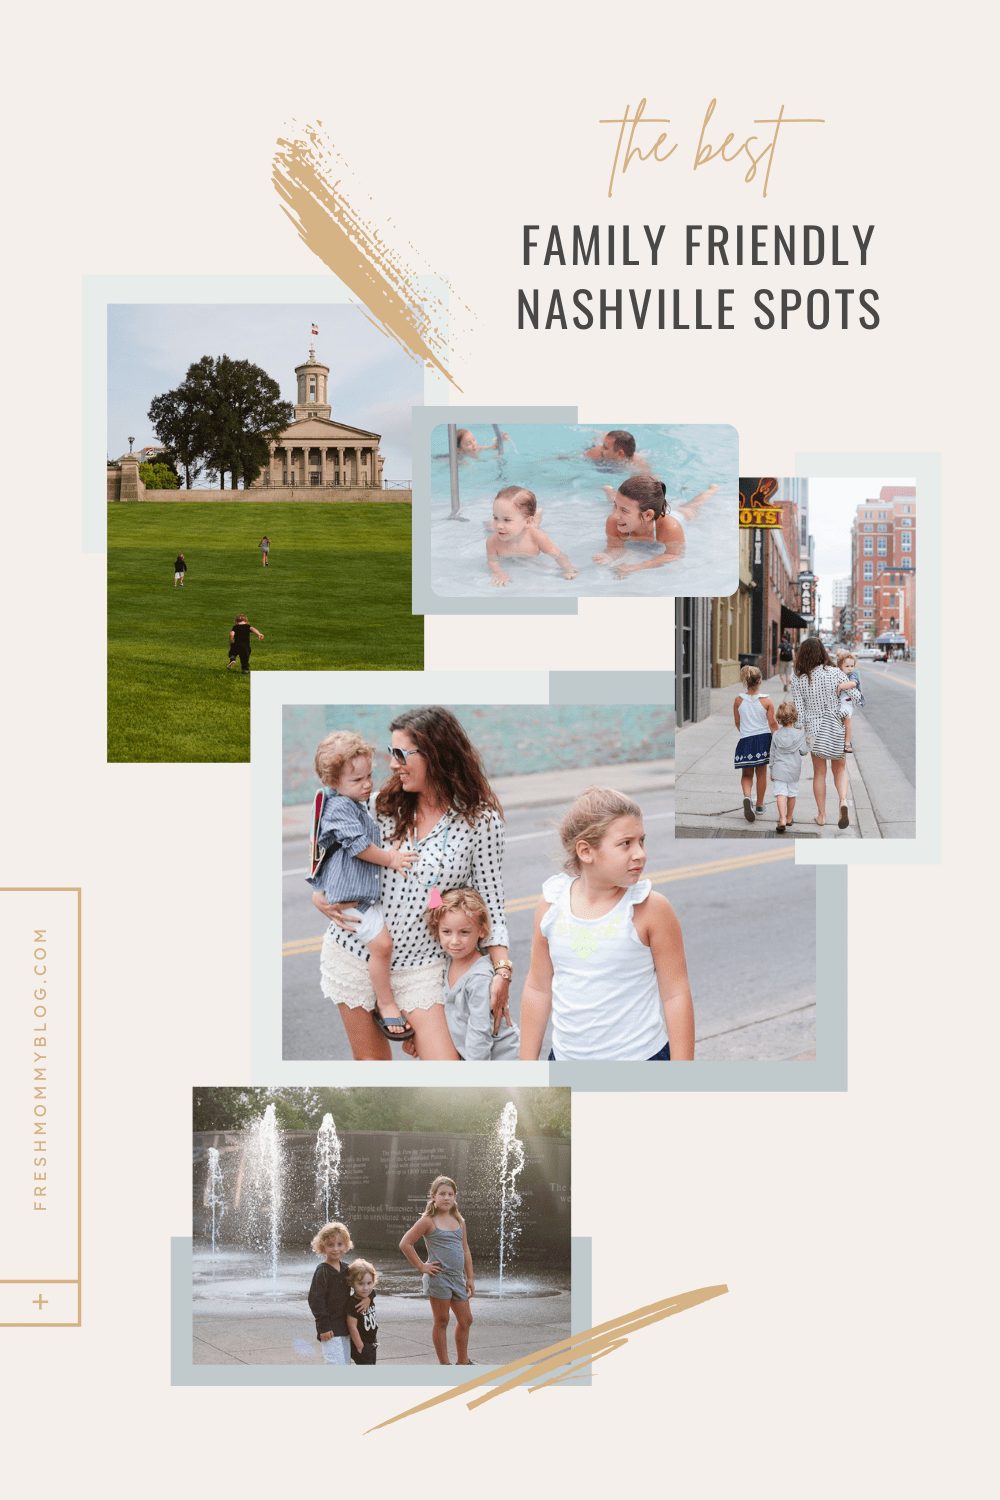 Travel Guide: The Best Things to Do in Nashville with Kids. From water play in Nashville to family-friendly Nashville restaurants and more -- we've got Nashville Family-Friendly travel covered!